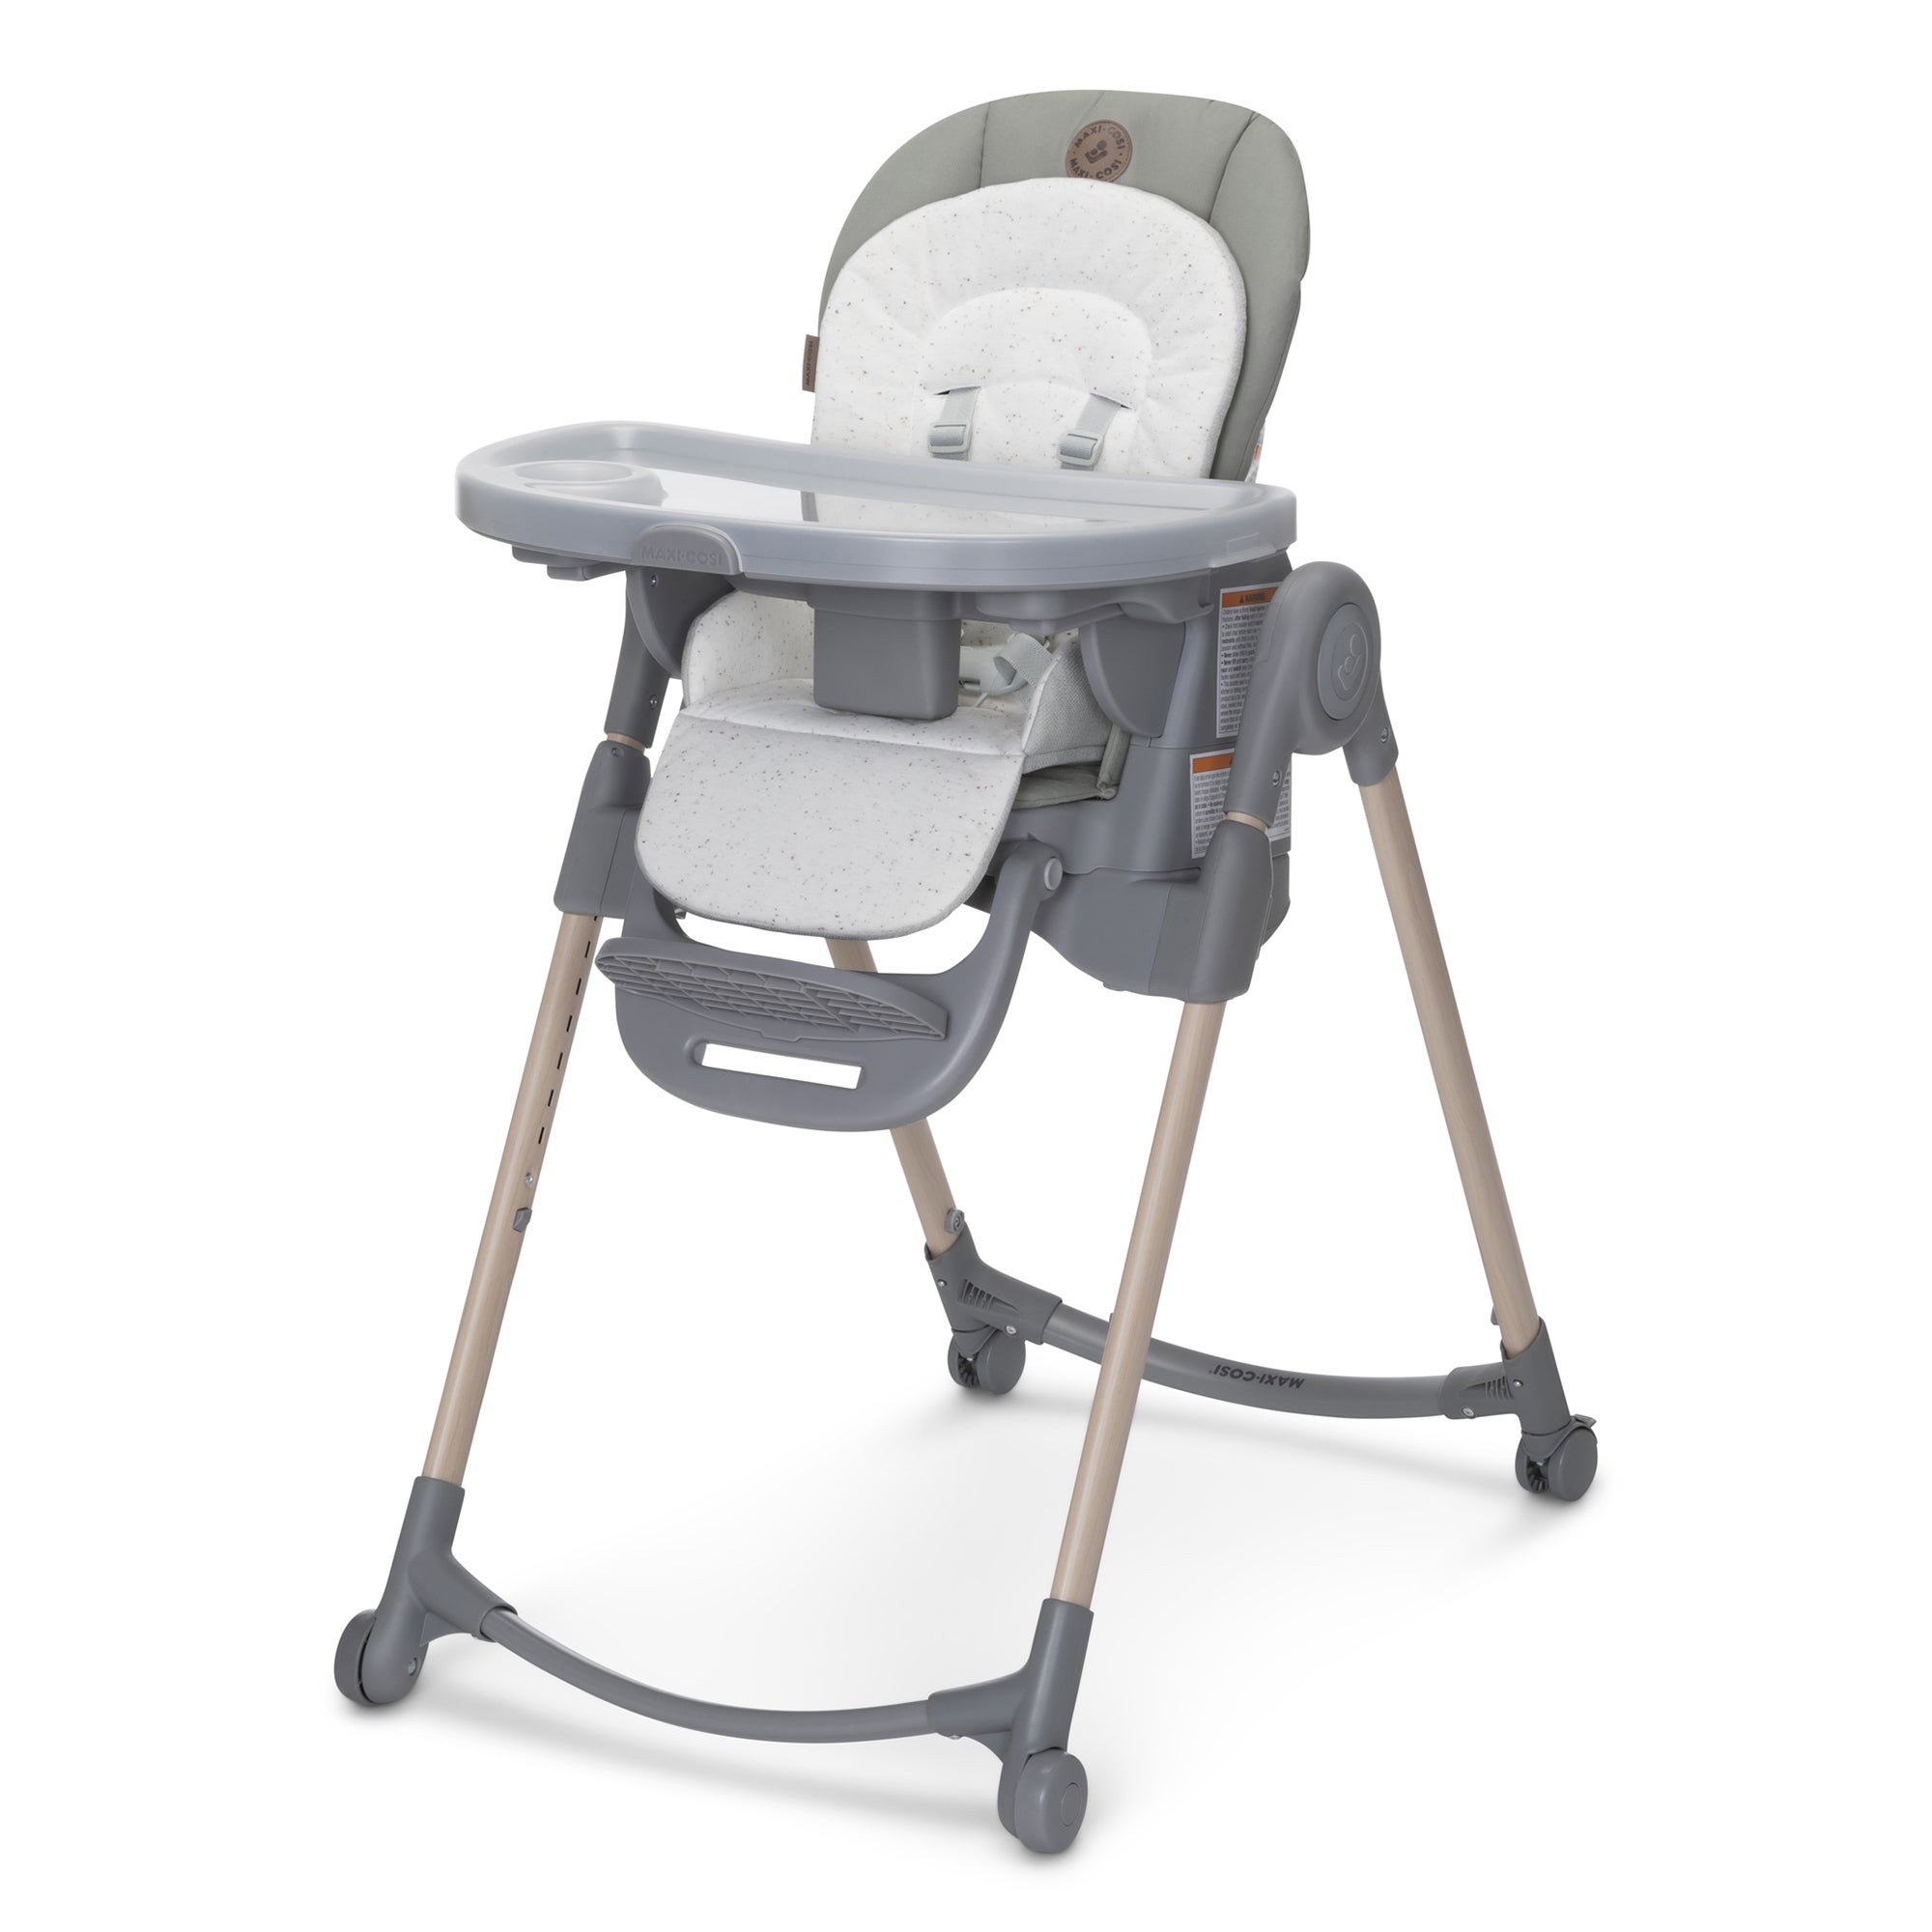 Minla 6-in-1 Adjustable High Chair - EcoCare Classic Green